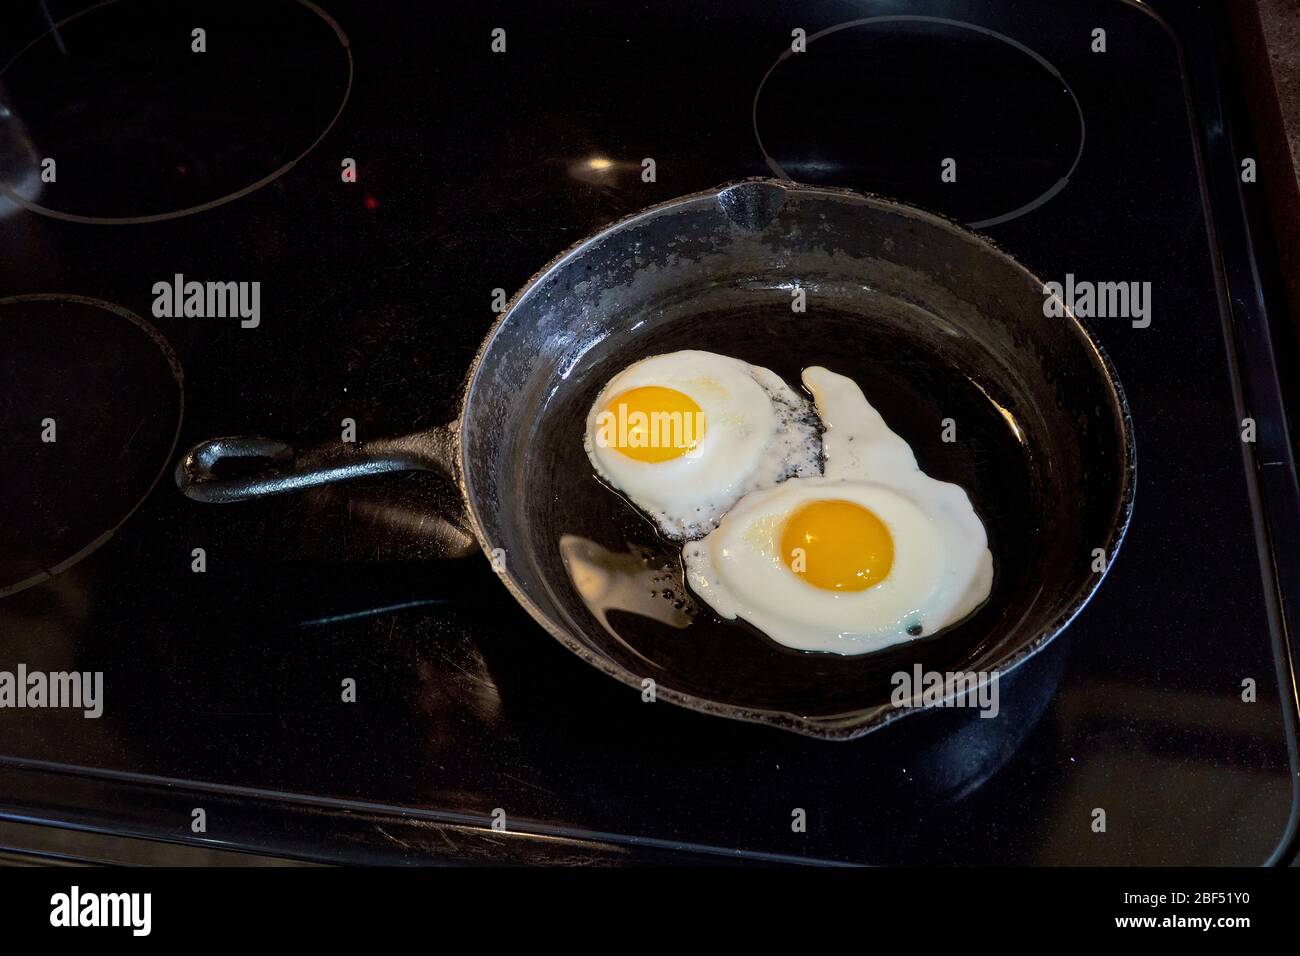 Breakfast Two sunny side up eggs fsliding out of a cast iron skillet on white plate Stock Photo